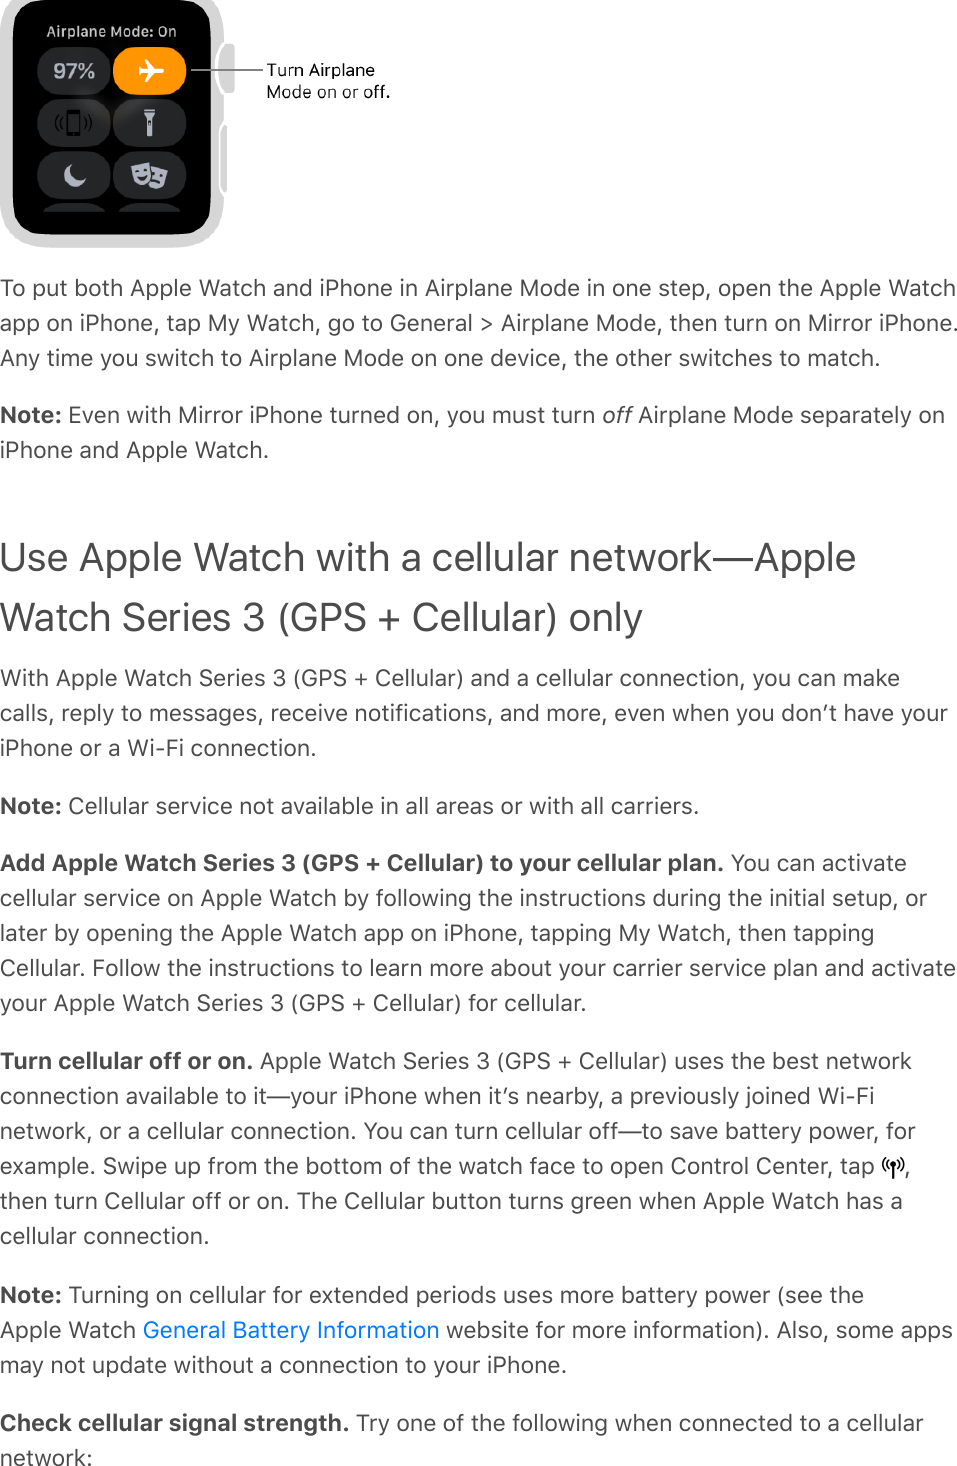 To put both Apple Watch and iPhone in Airplane Mode in one step, open the Apple Watchapp on iPhone, tap My Watch, go to General &gt; Airplane Mode, then turn on Mirror iPhone.Any time you switch to Airplane Mode on one device, the other switches to match.Note: Even with Mirror iPhone turned on, you must turn off Airplane Mode separately oniPhone and Apple Watch.Use Apple Watch with a cellular network—AppleWatch Series 3 (GPS + Cellular) onlyWith Apple Watch Series 3 (GPS + Cellular) and a cellular connection, you can makecalls, reply to messages, receive notifications, and more, even when you donʼt have youriPhone or a Wi-Fi connection.Note: Cellular service not available in all areas or with all carriers.Add Apple Watch Series 3 (GPS + Cellular) to your cellular plan. You can activatecellular service on Apple Watch by following the instructions during the initial setup, orlater by opening the Apple Watch app on iPhone, tapping My Watch, then tappingCellular. Follow the instructions to learn more about your carrier service plan and activateyour Apple Watch Series 3 (GPS + Cellular) for cellular.Turn cellular off or on. Apple Watch Series 3 (GPS + Cellular) uses the best networkconnection available to it—your iPhone when itʼs nearby, a previously joined Wi-Finetwork, or a cellular connection. You can turn cellular off—to save battery power, forexample. Swipe up from the bottom of the watch face to open Control Center, tap  ,then turn Cellular off or on. The Cellular button turns green when Apple Watch has acellular connection.Note: Turning on cellular for extended periods uses more battery power (see theApple Watch   website for more information). Also, some appsmay not update without a connection to your iPhone.Check cellular signal strength. Try one of the following when connected to a cellularnetwork:General Battery Information